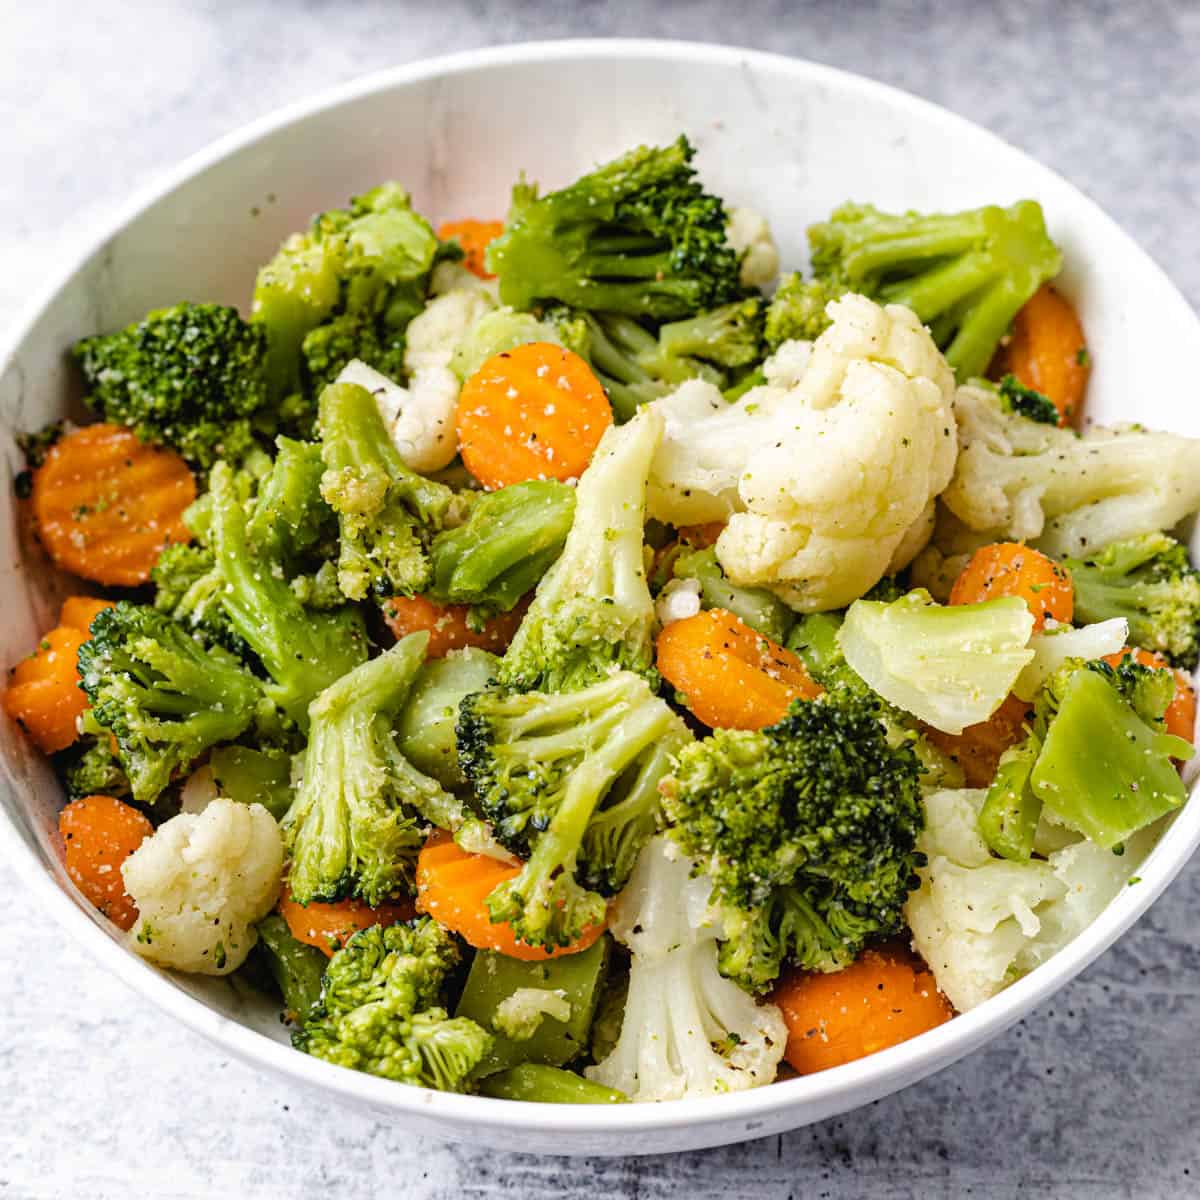 The Ultimate Guide to Instant Pot Steamed Vegetables - Piping Pot